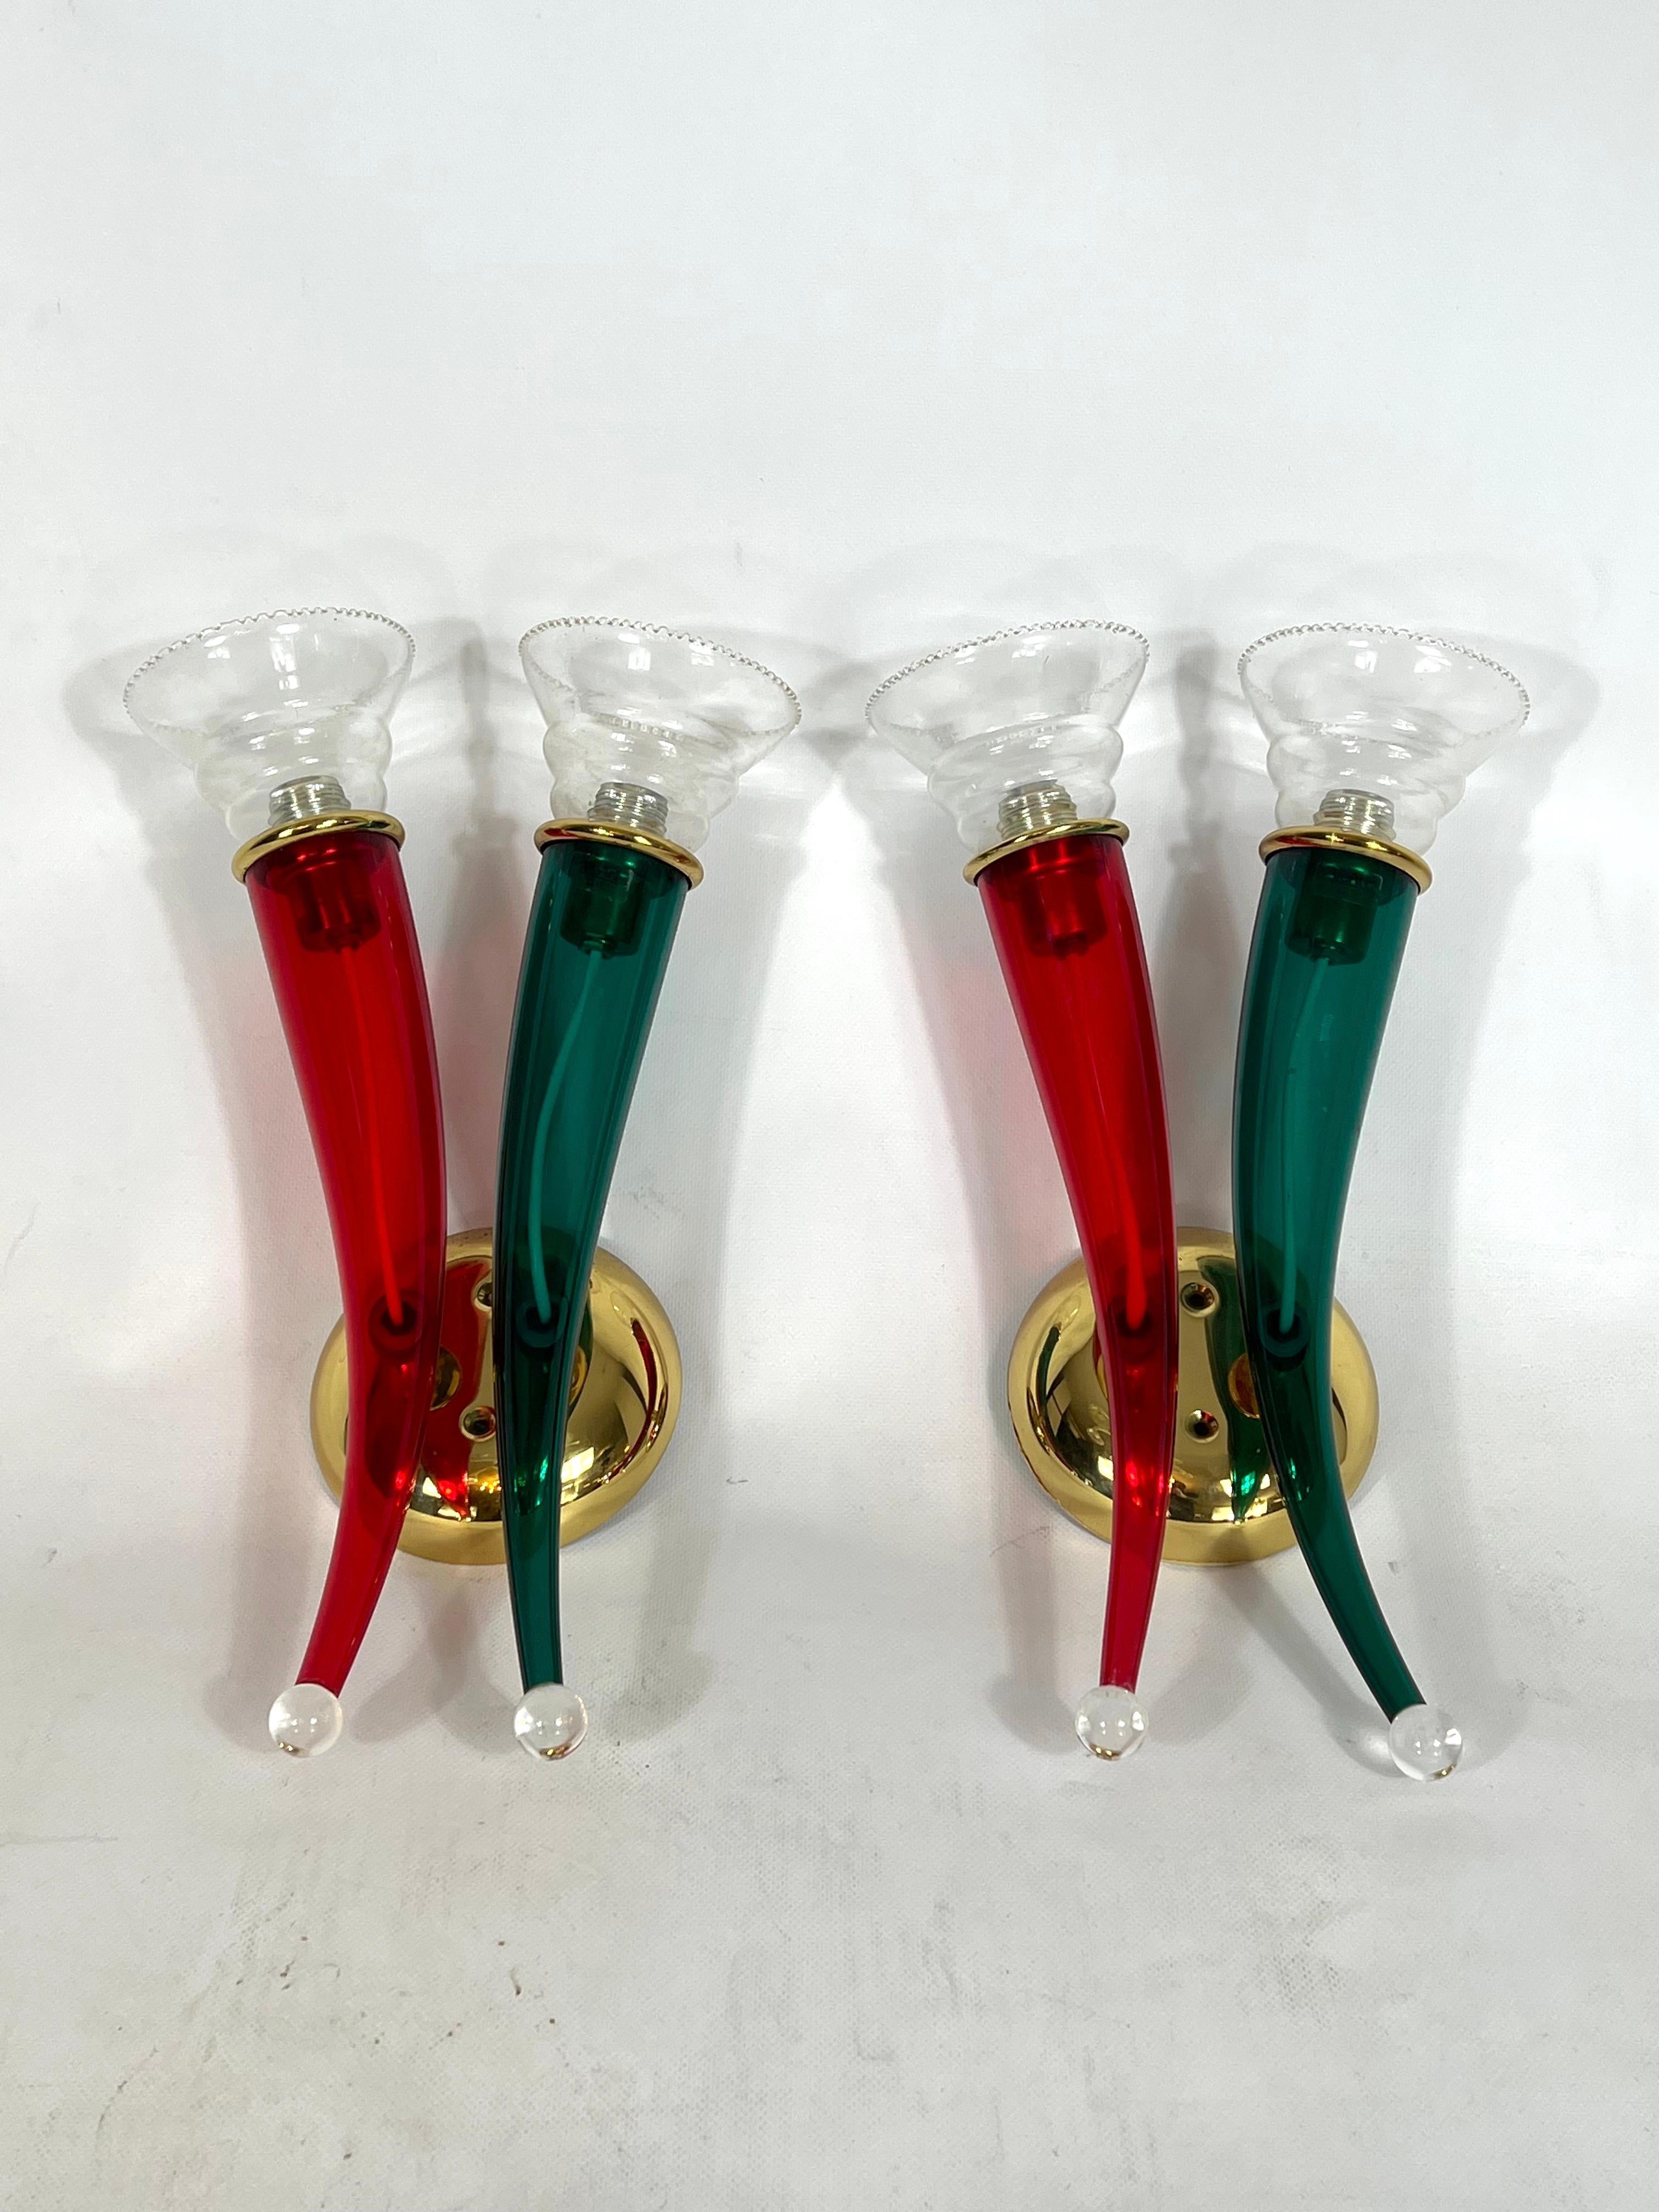 Vintage Pair of Murano Glass Sconces Signed by VeArt, Italy, 1970s For Sale 4